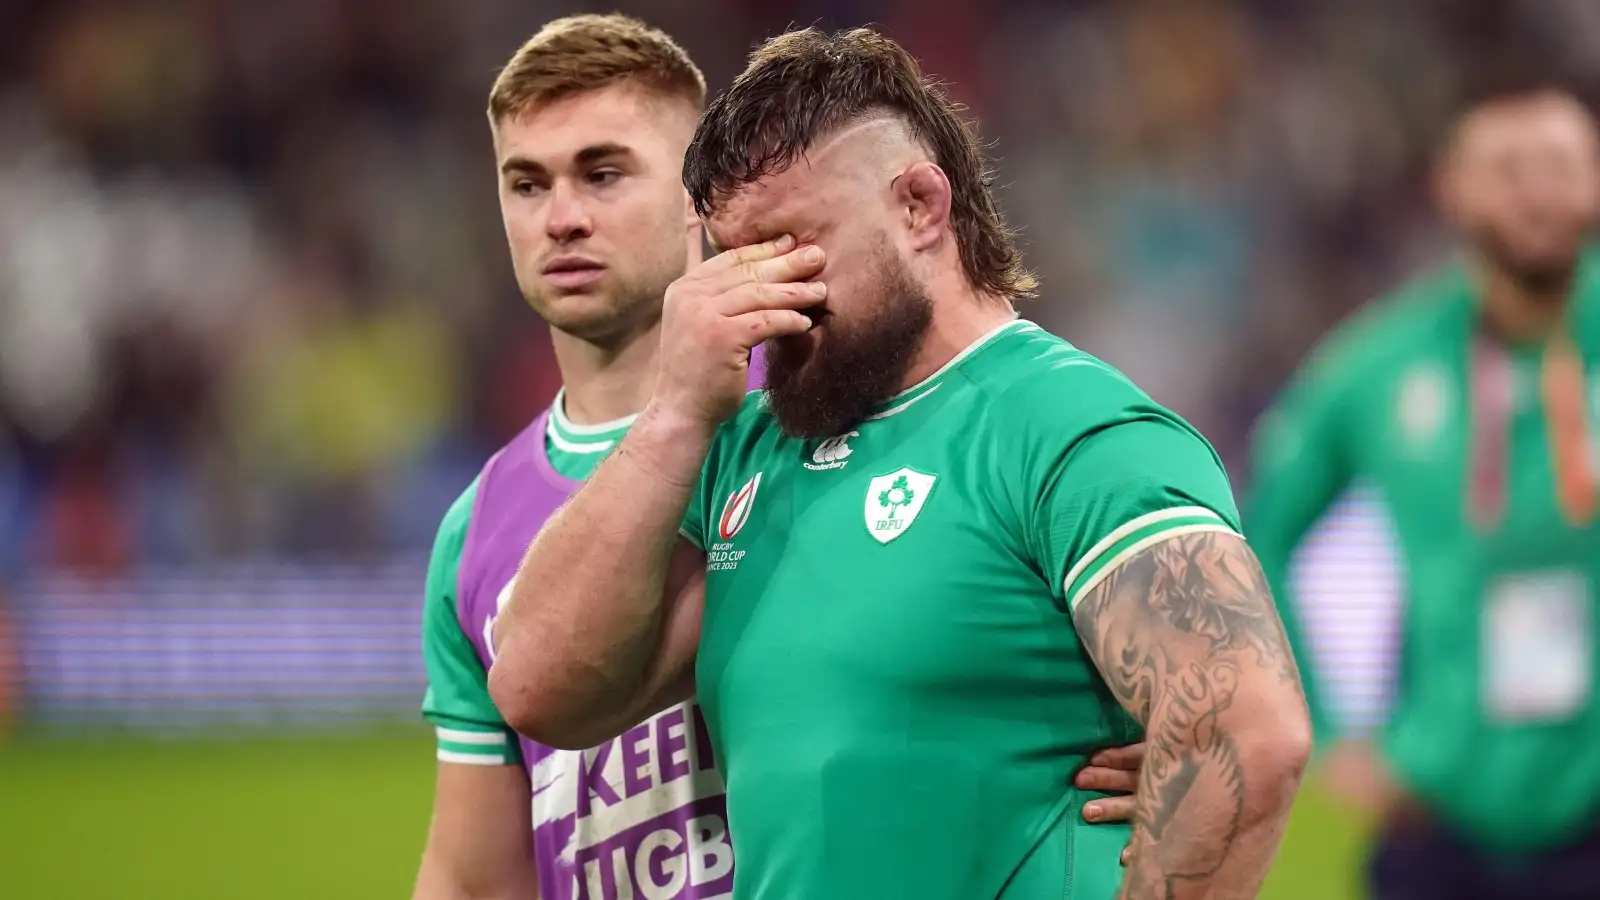 Ireland's Andrew Porter after a disappointing loss in the Rugby World Cup.